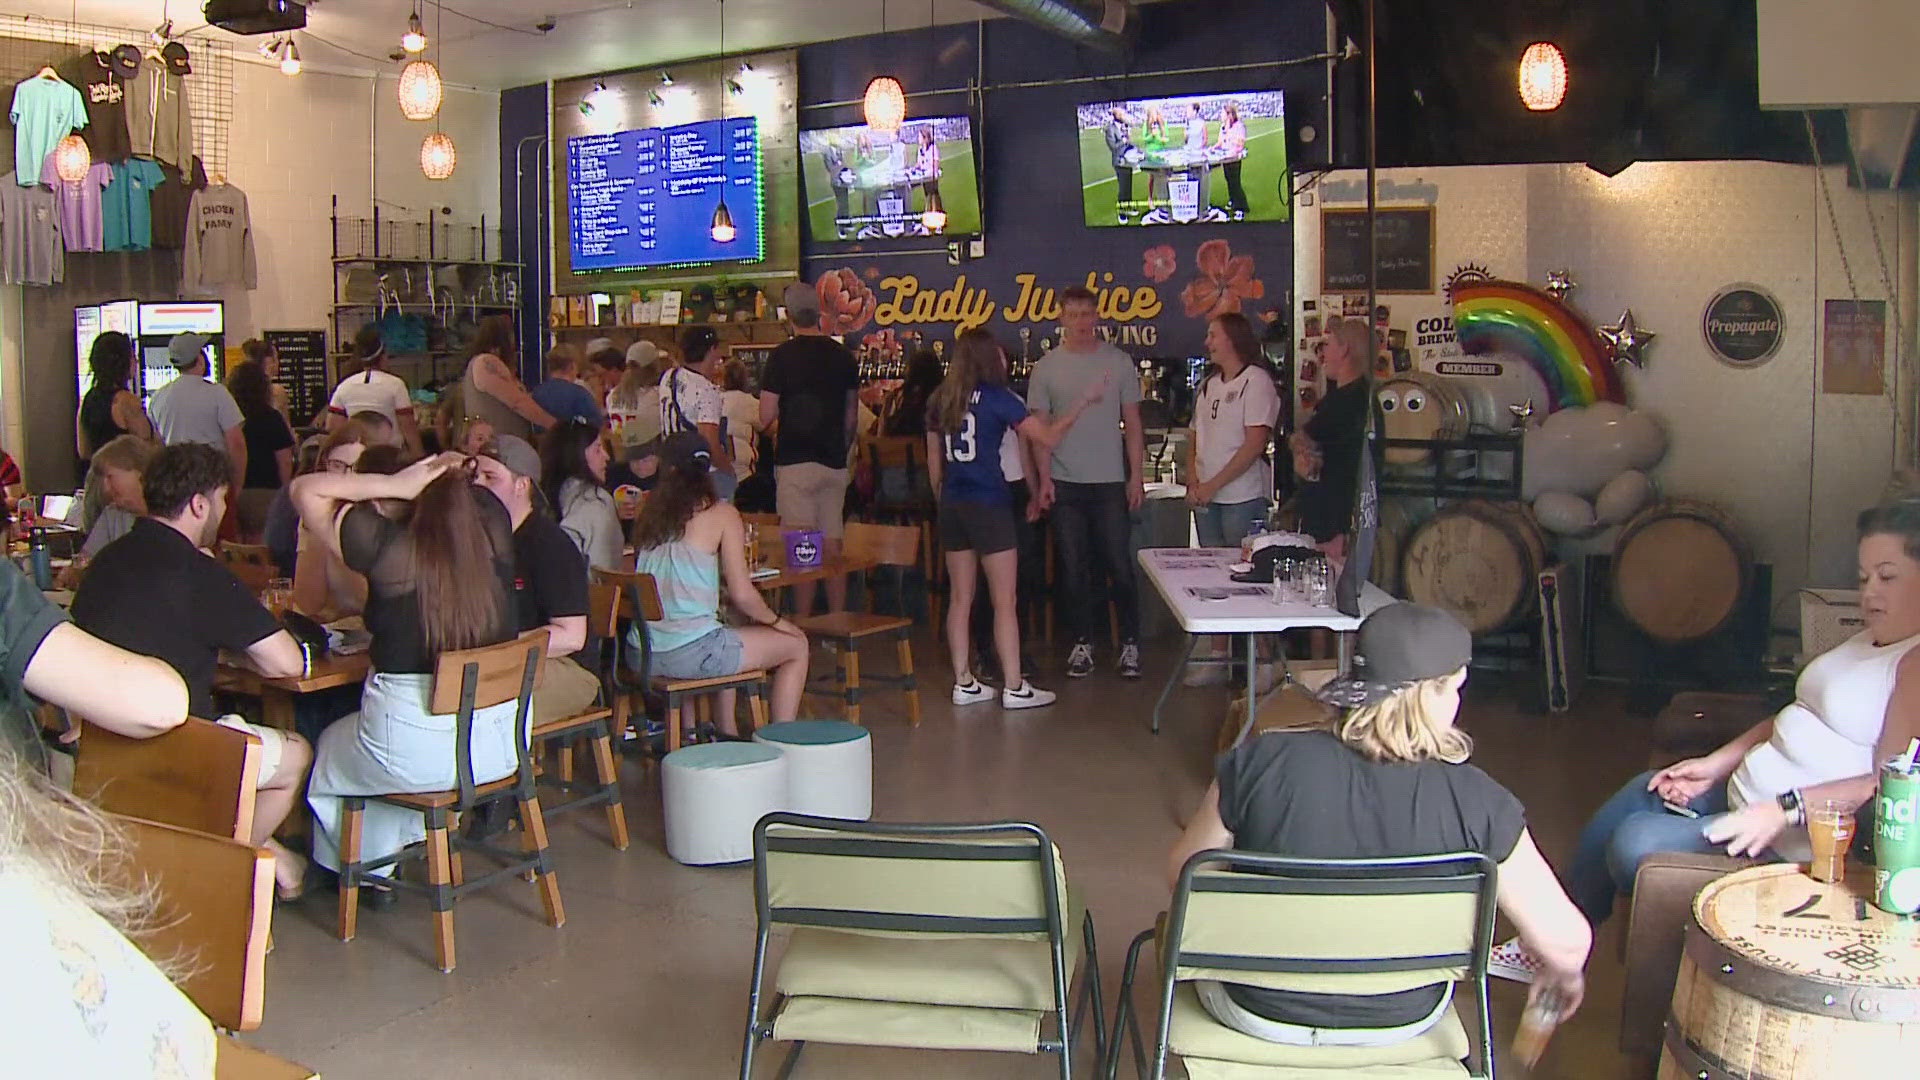 The event in Englewood gave fans a chance to watch women's soccer and celebrate the beginning of Pride Month.